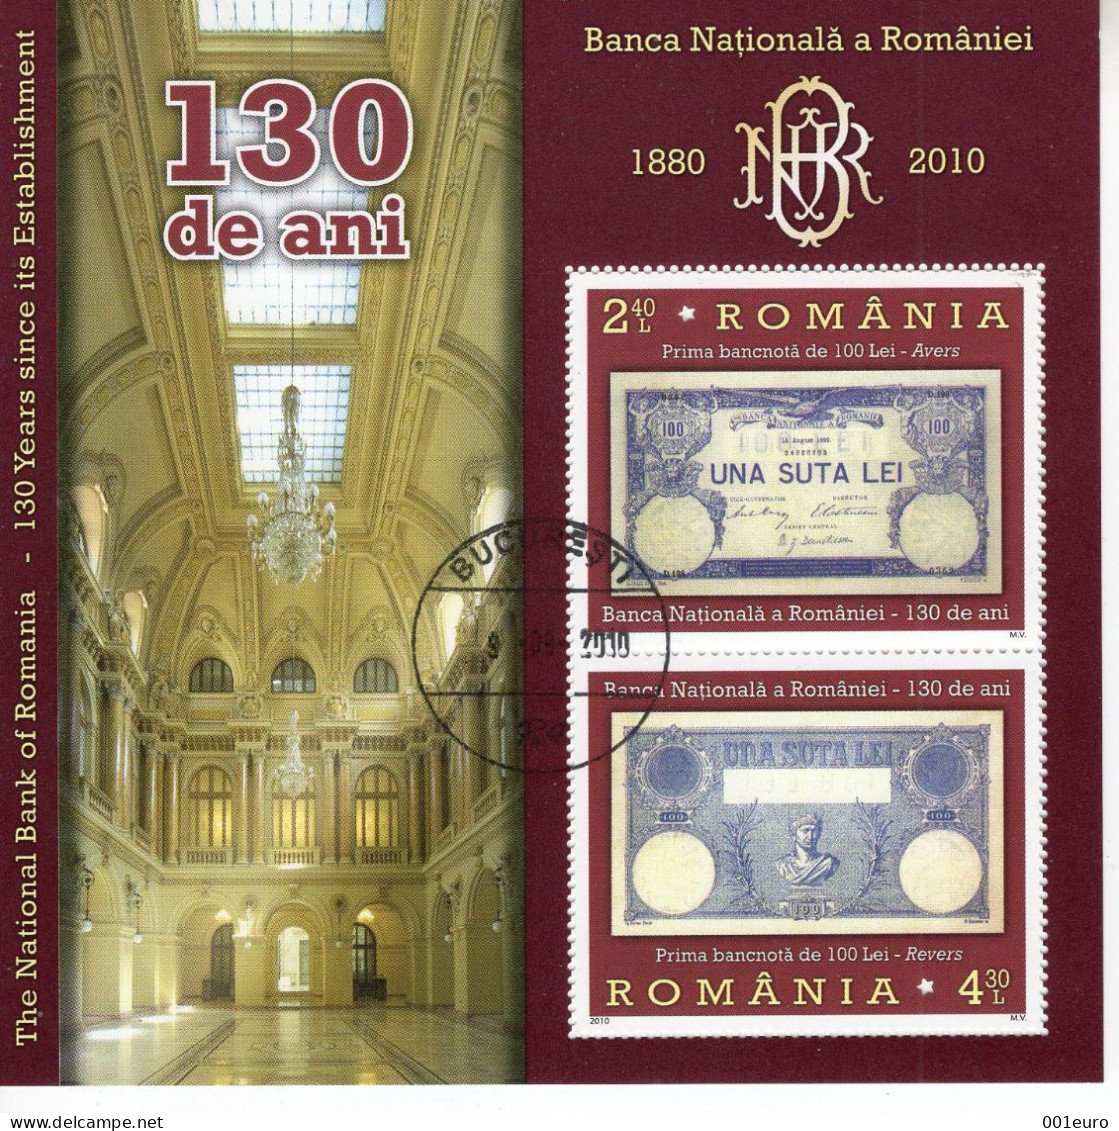 ROMANIA 2010 : ROMANIAN NATIONAL BANK130 YEARS - BANKNOTE, Used Souvenir Block - Registered Shipping! - Usati